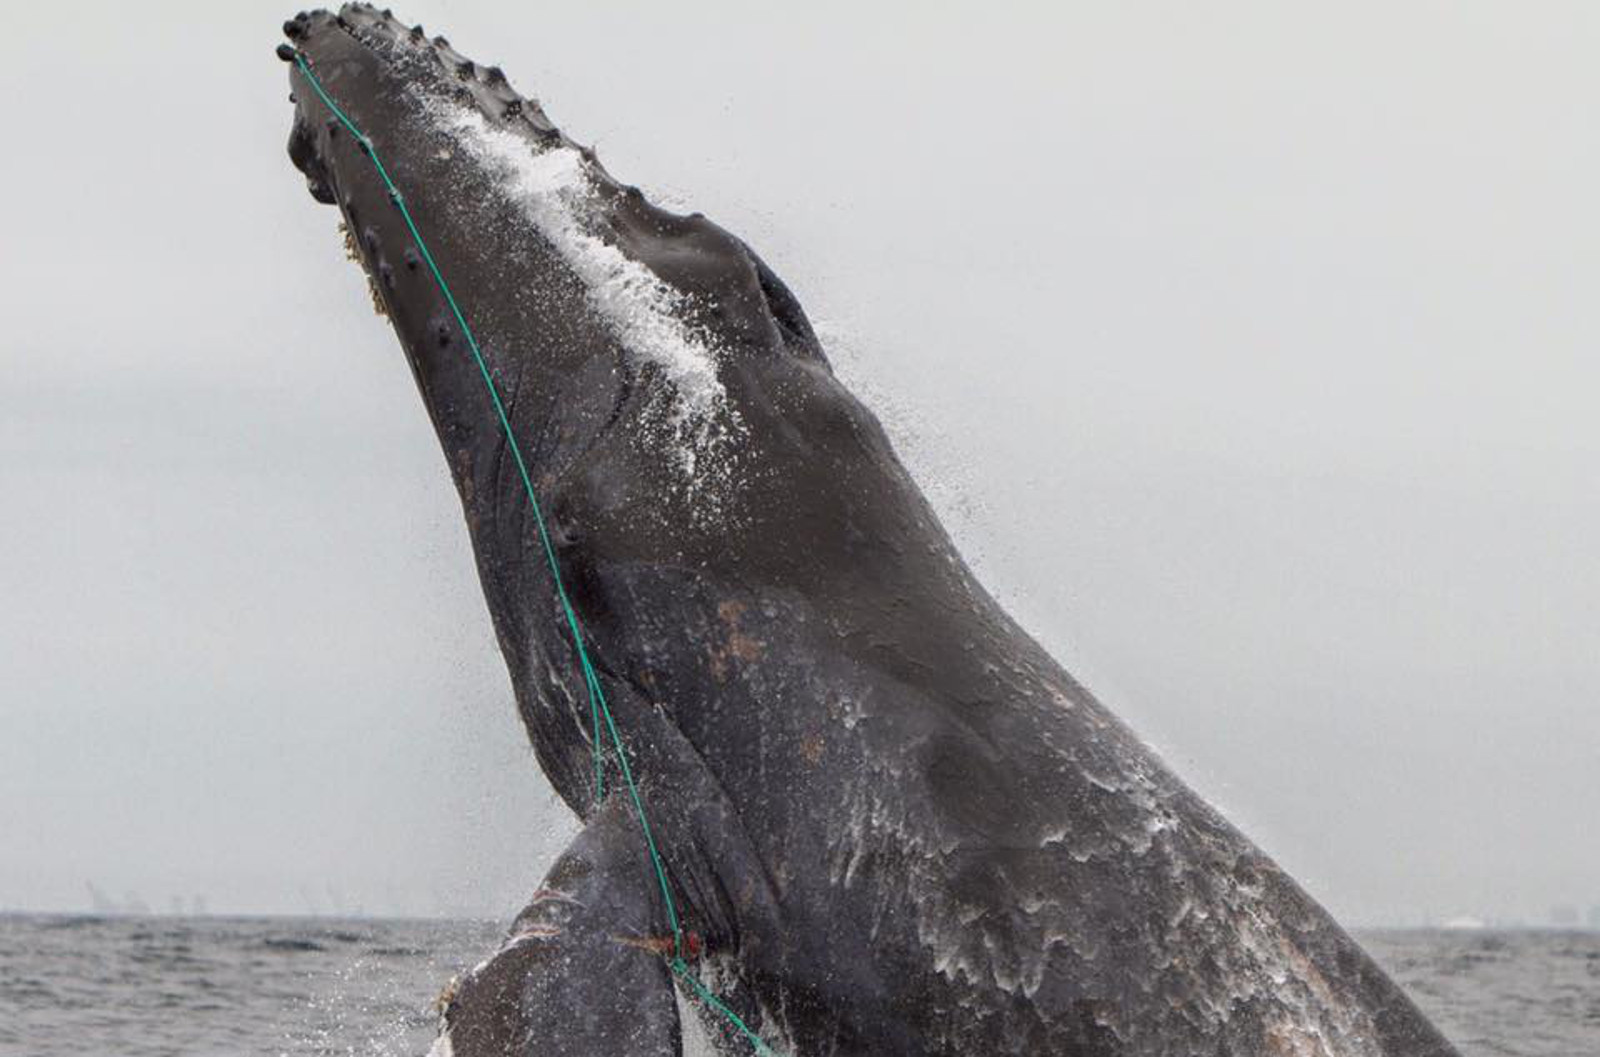 This Might Look Like a Picture of a Whale Breaching, But it Tells a Sad Story About Our Food Choices